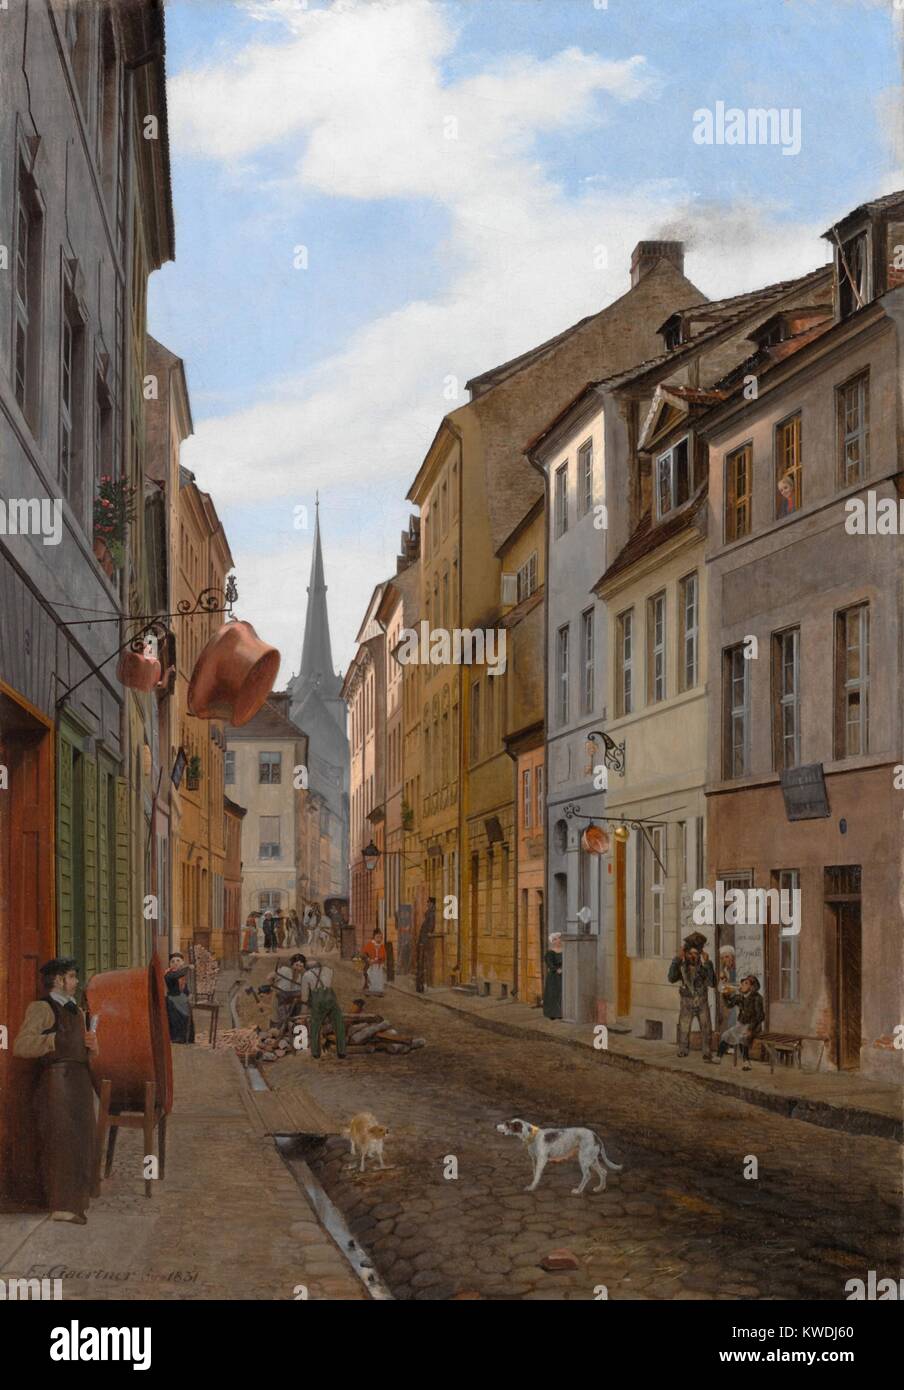 PAROCHIALSTRASSE IN BERLIN, by Eduard Gaertner, 1831, German painting, oil on canvas. Gaertner specialized in architectural painting in which he possibly used a camera obscura to compose. Rich with details, it includes street workers, drains, shop signs, dogs, foot, and carriage traffic. In the 1830s he enjoyed Royal patronage and flourished (BSLOC_2017_9_143) Stock Photo